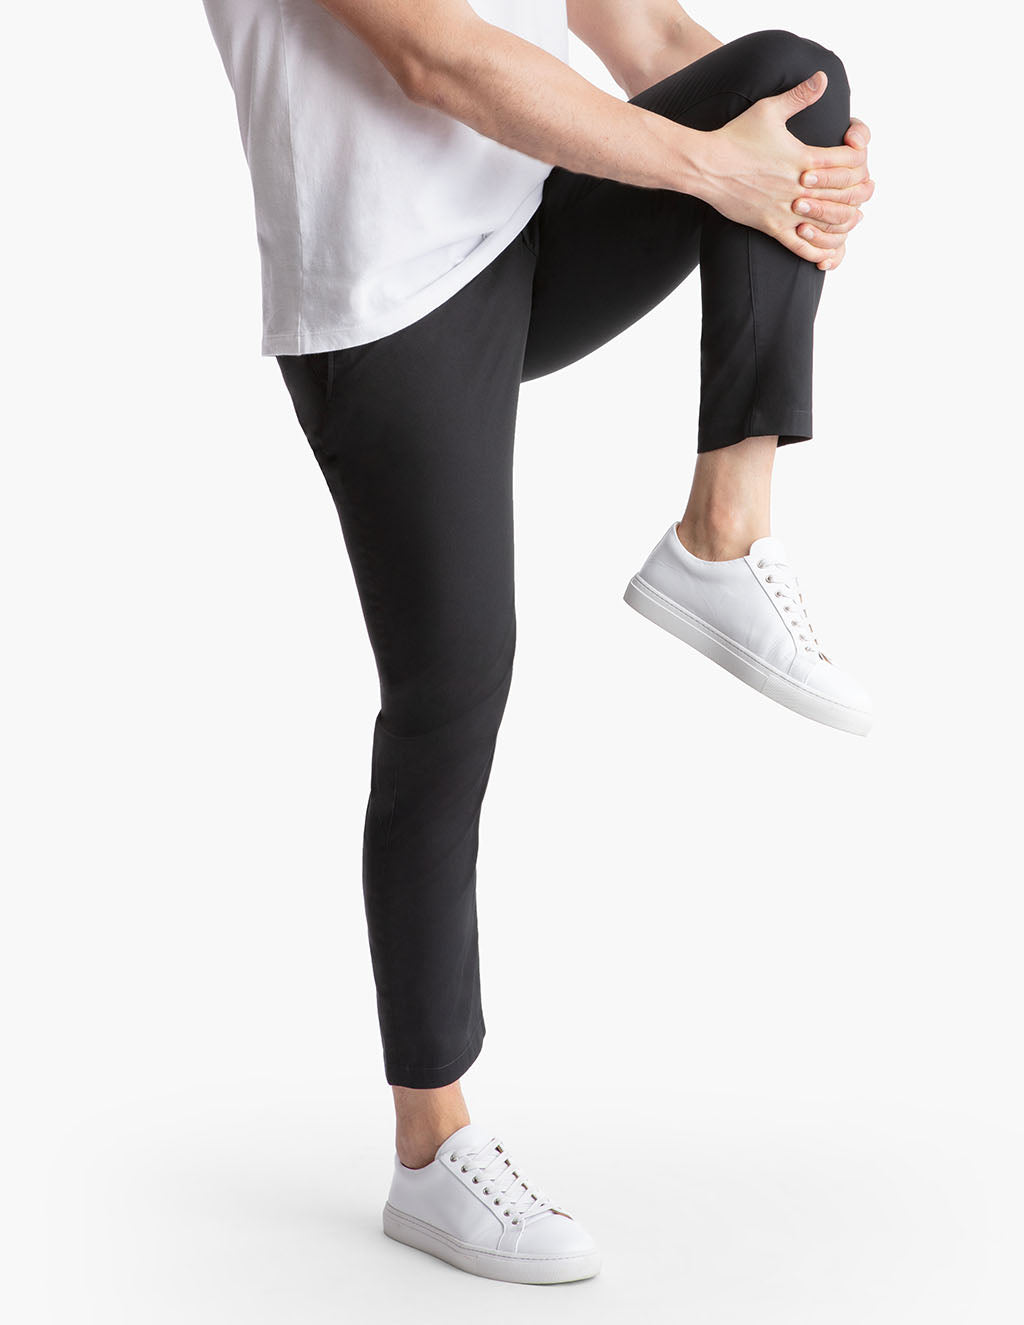 Conceited Womens Seamless : : Clothing, Shoes & Accessories